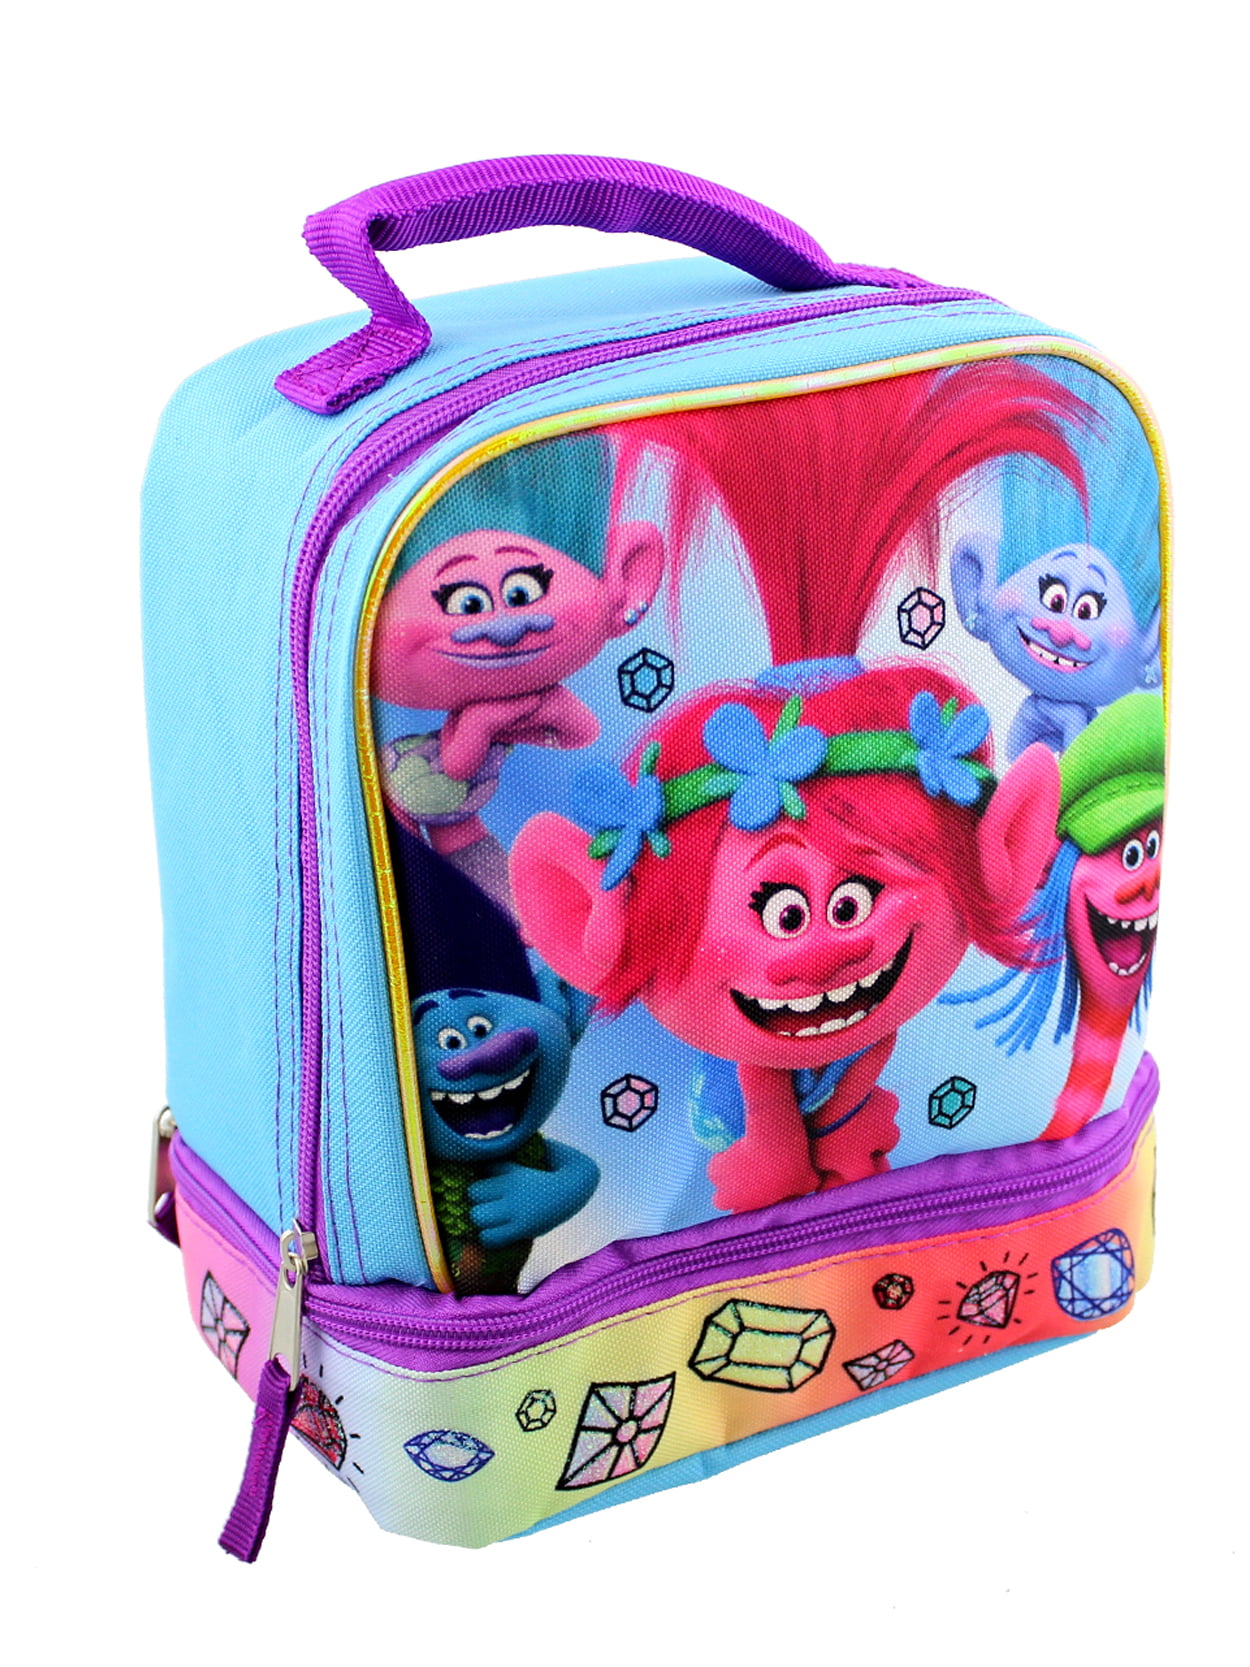 Details about   NWT TROLLS WORLD TOUR Insulated Kids Lunch Bag Tote W/ Bottle Pocket Inner Pouch 